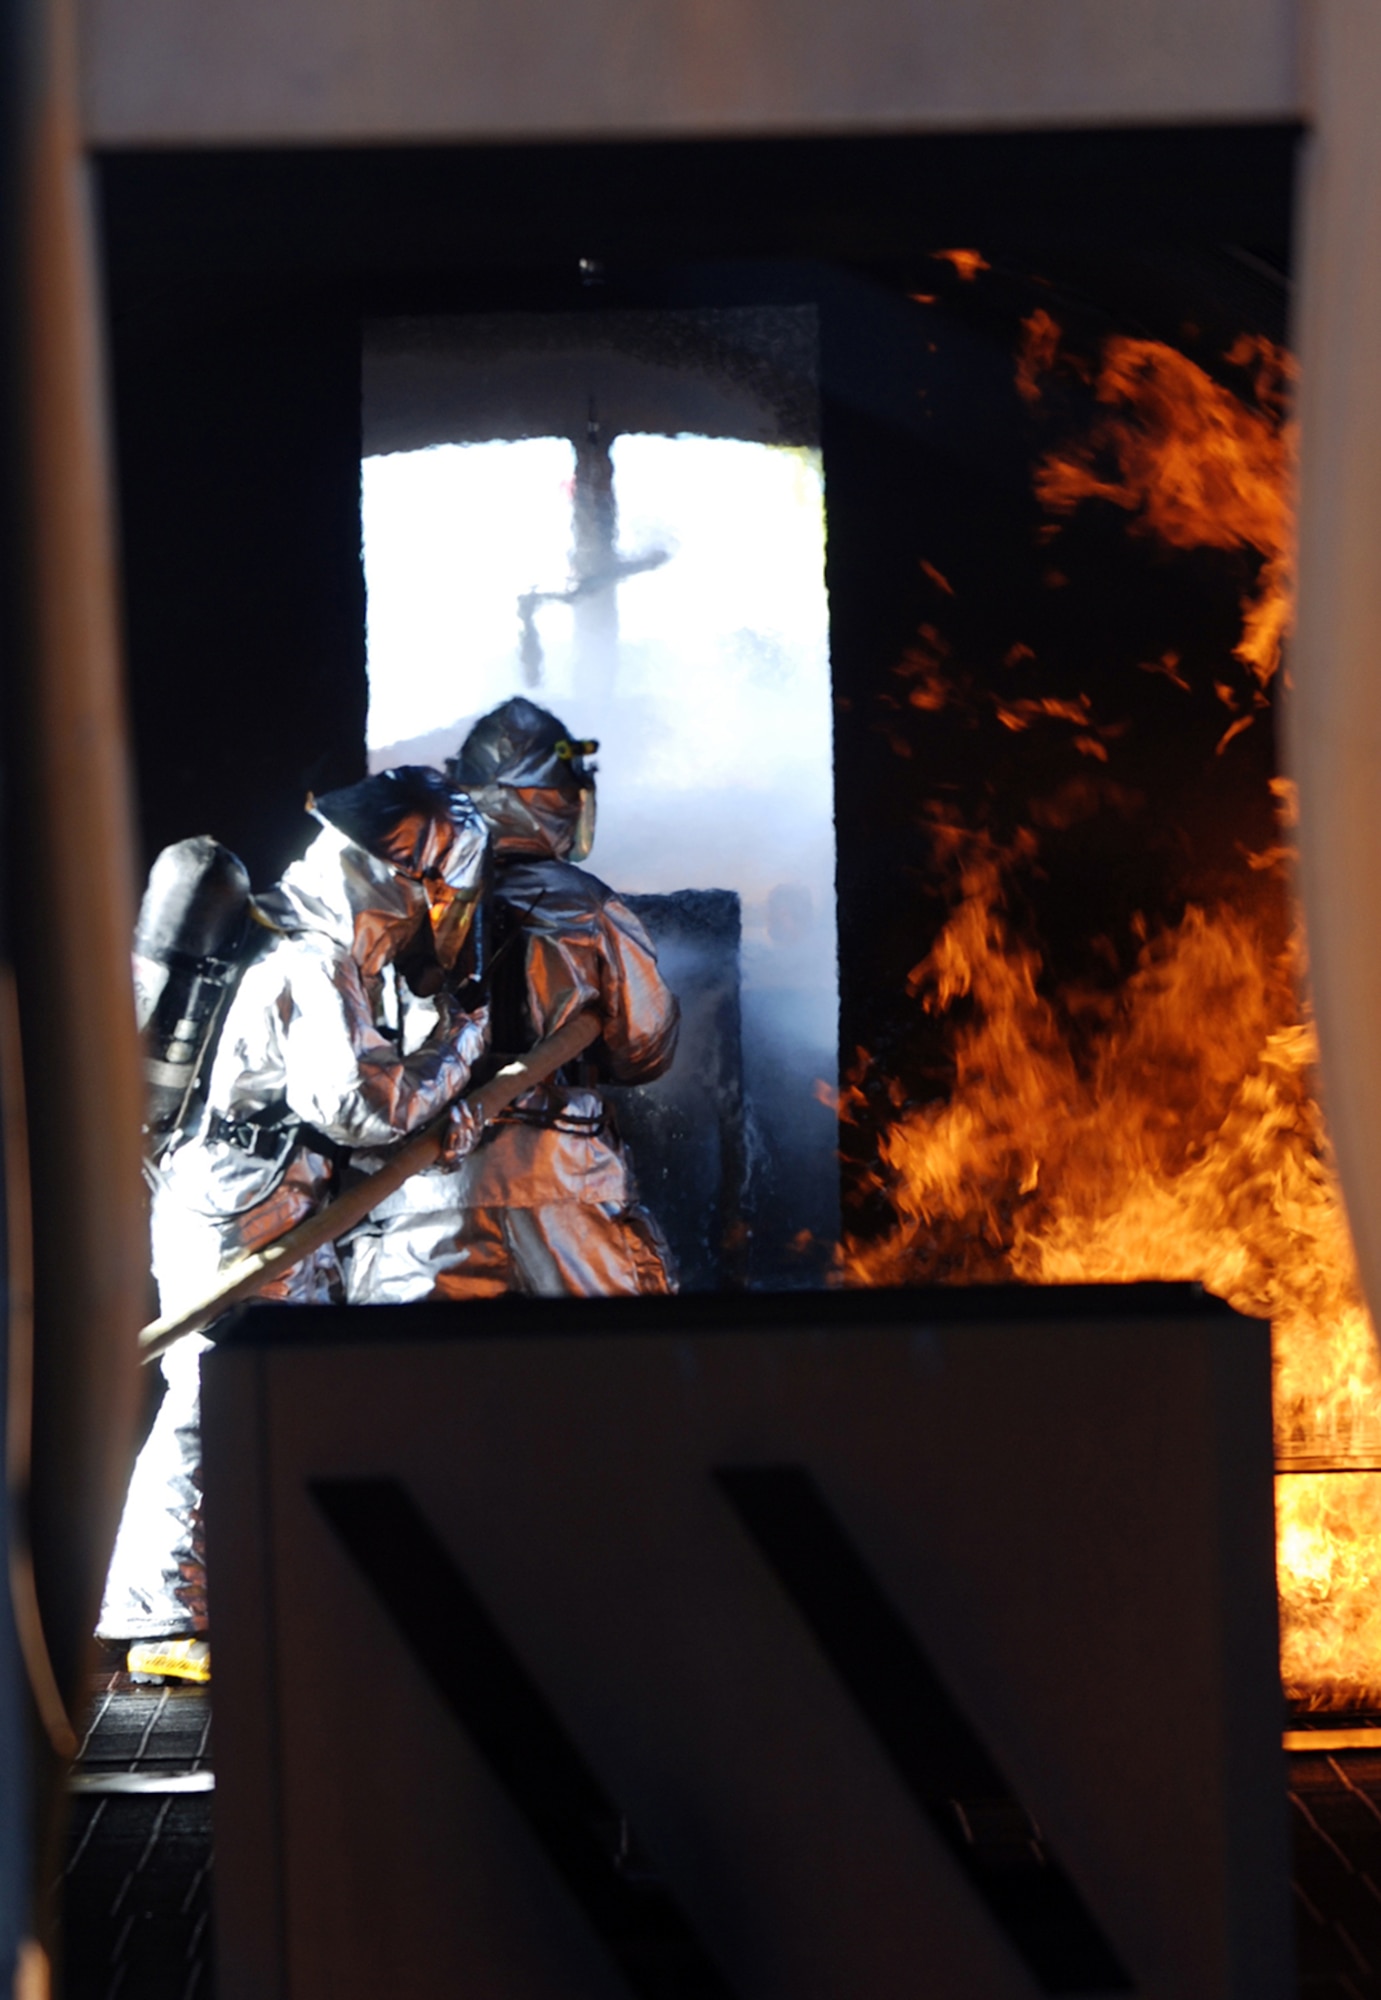 McConnell firefighters extinguish a fire in the cockpit of a mach aircraft, April 11, during a live-fire training exercise on base. Firefighters from the 22nd Civil Engineer Squadron and the Kansas Air National Guard participated in the exercise. (Photo by Airman 1st Class Jessica Lockoski)